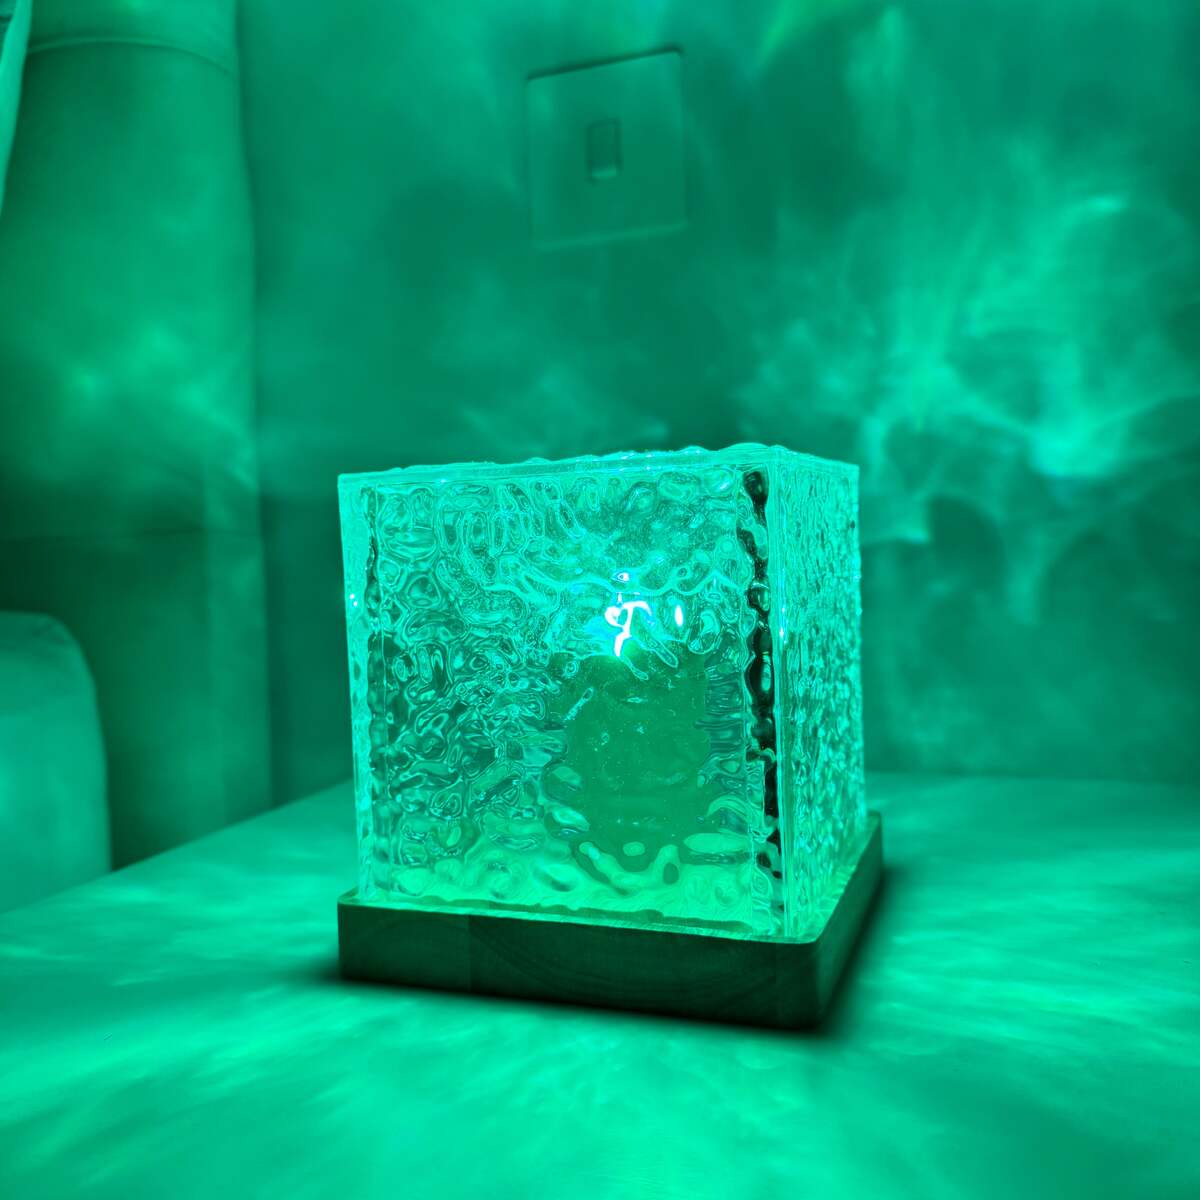 AirBlend™ Northern Lights Lamp